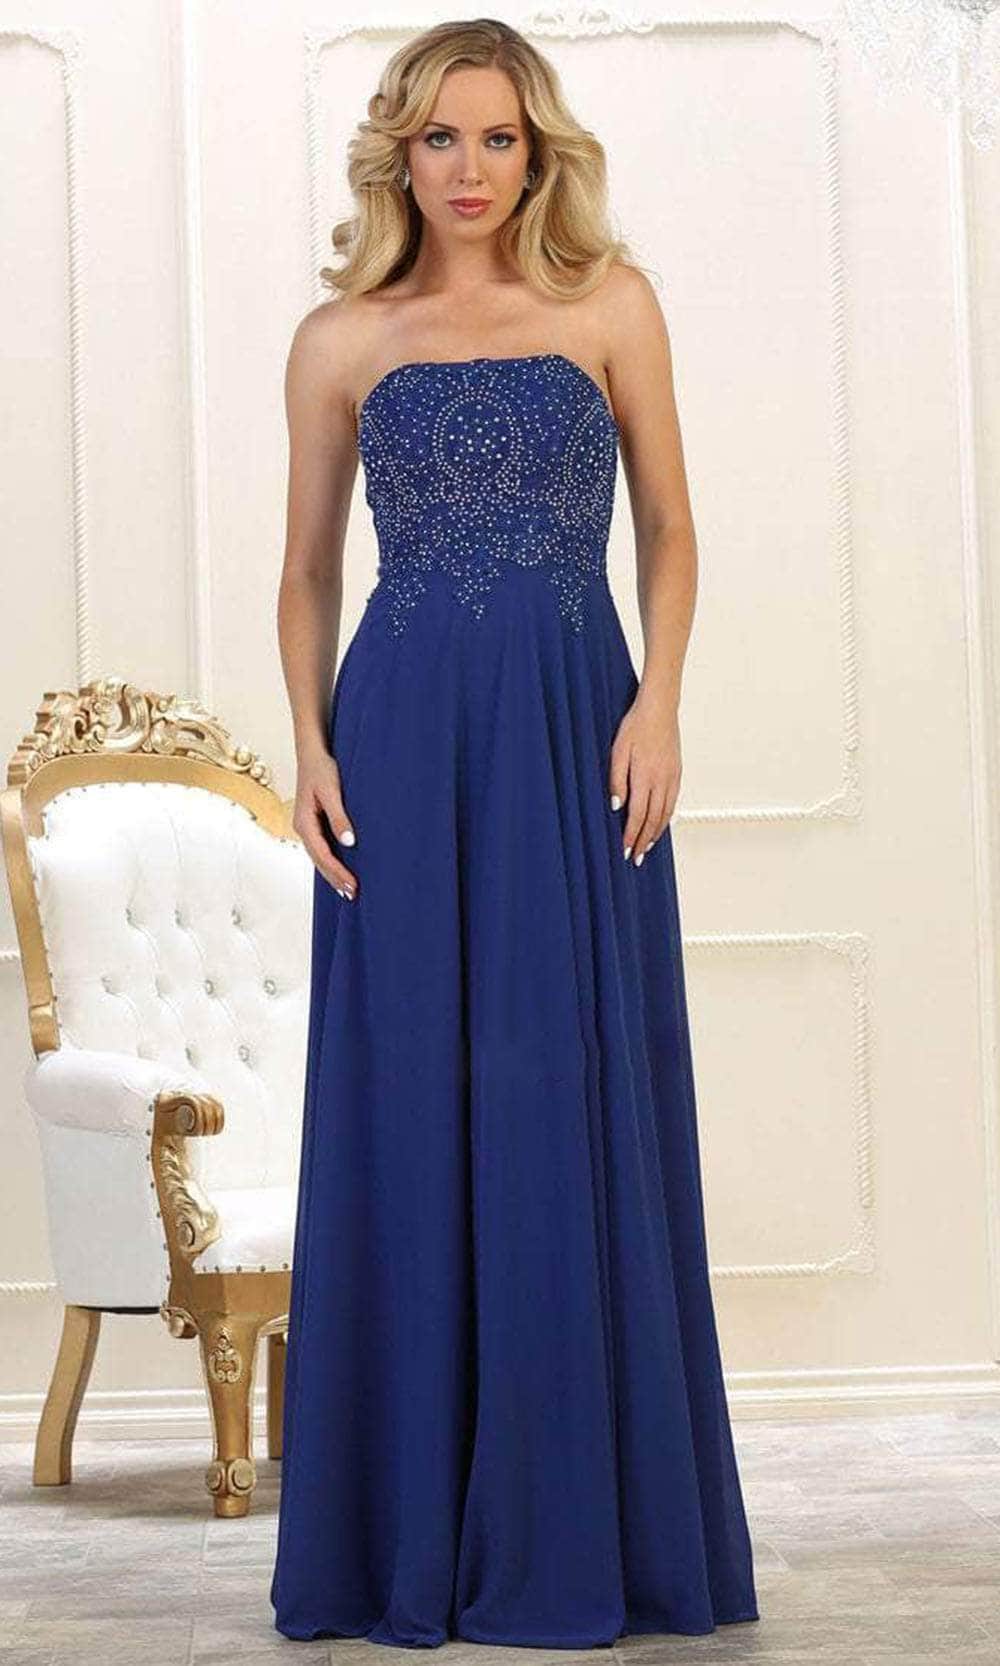 May Queen - MQ1277B Delicate Lace Strapless Corset Prom Gown Special Occasion Dress 22 / Navy